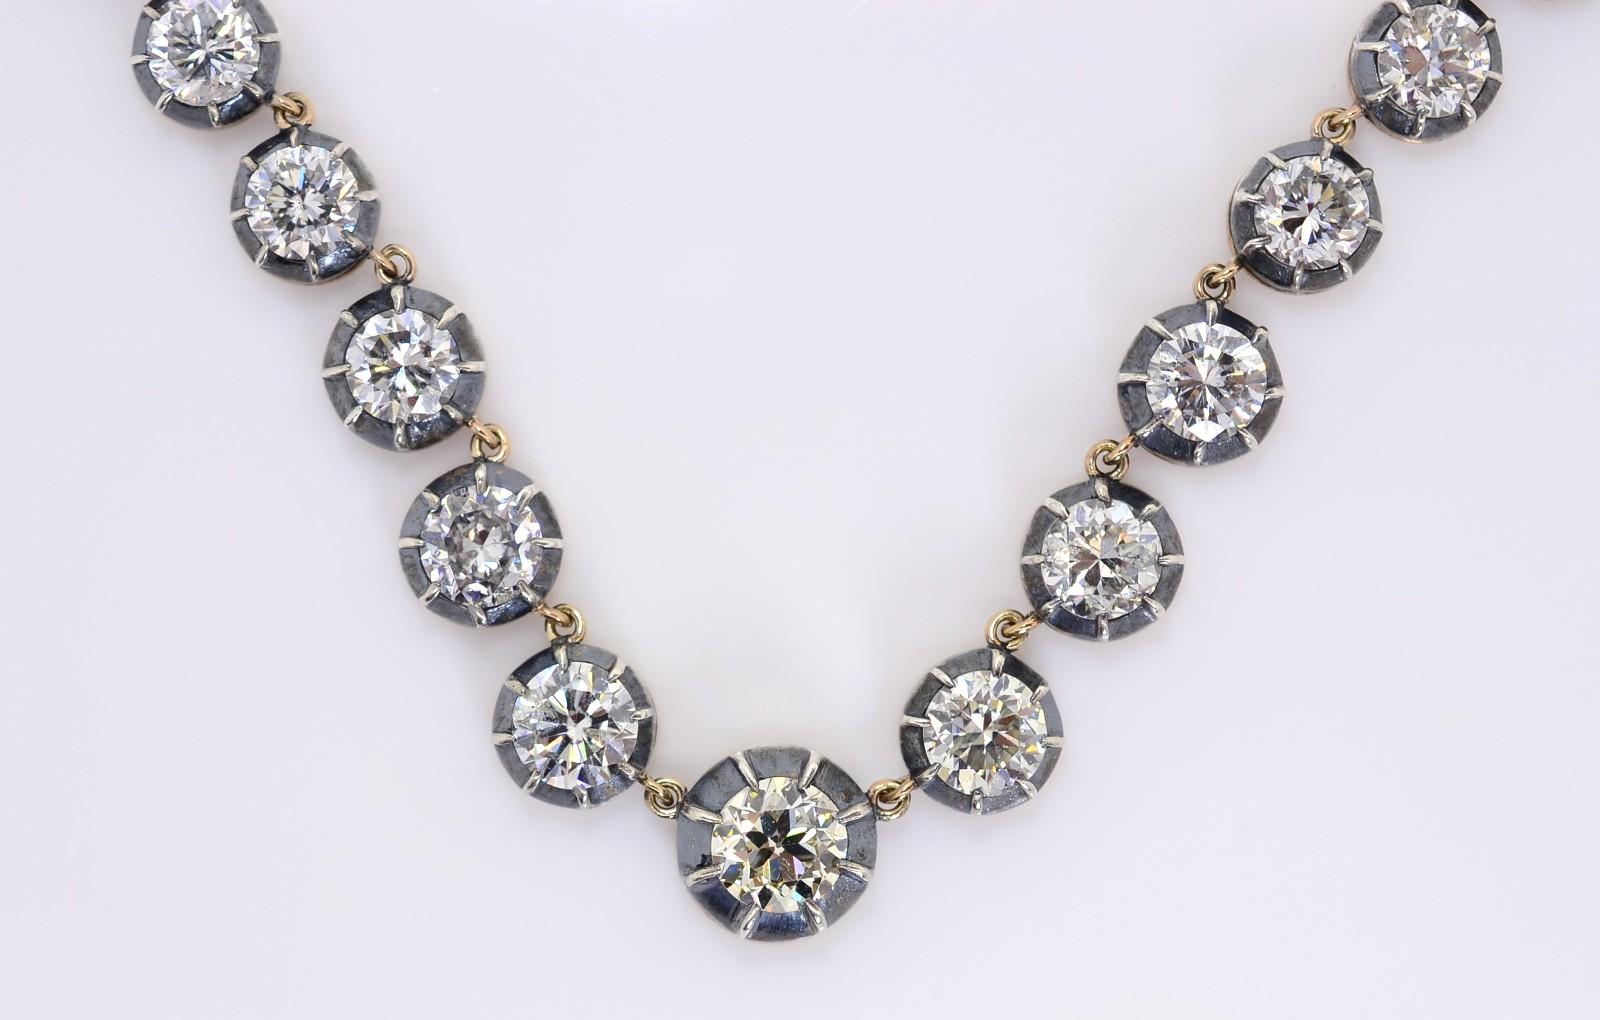 15.09 Carat Old Cut Diamond Victorian Revival Necklace In Good Condition For Sale In Beverly Hills, CA